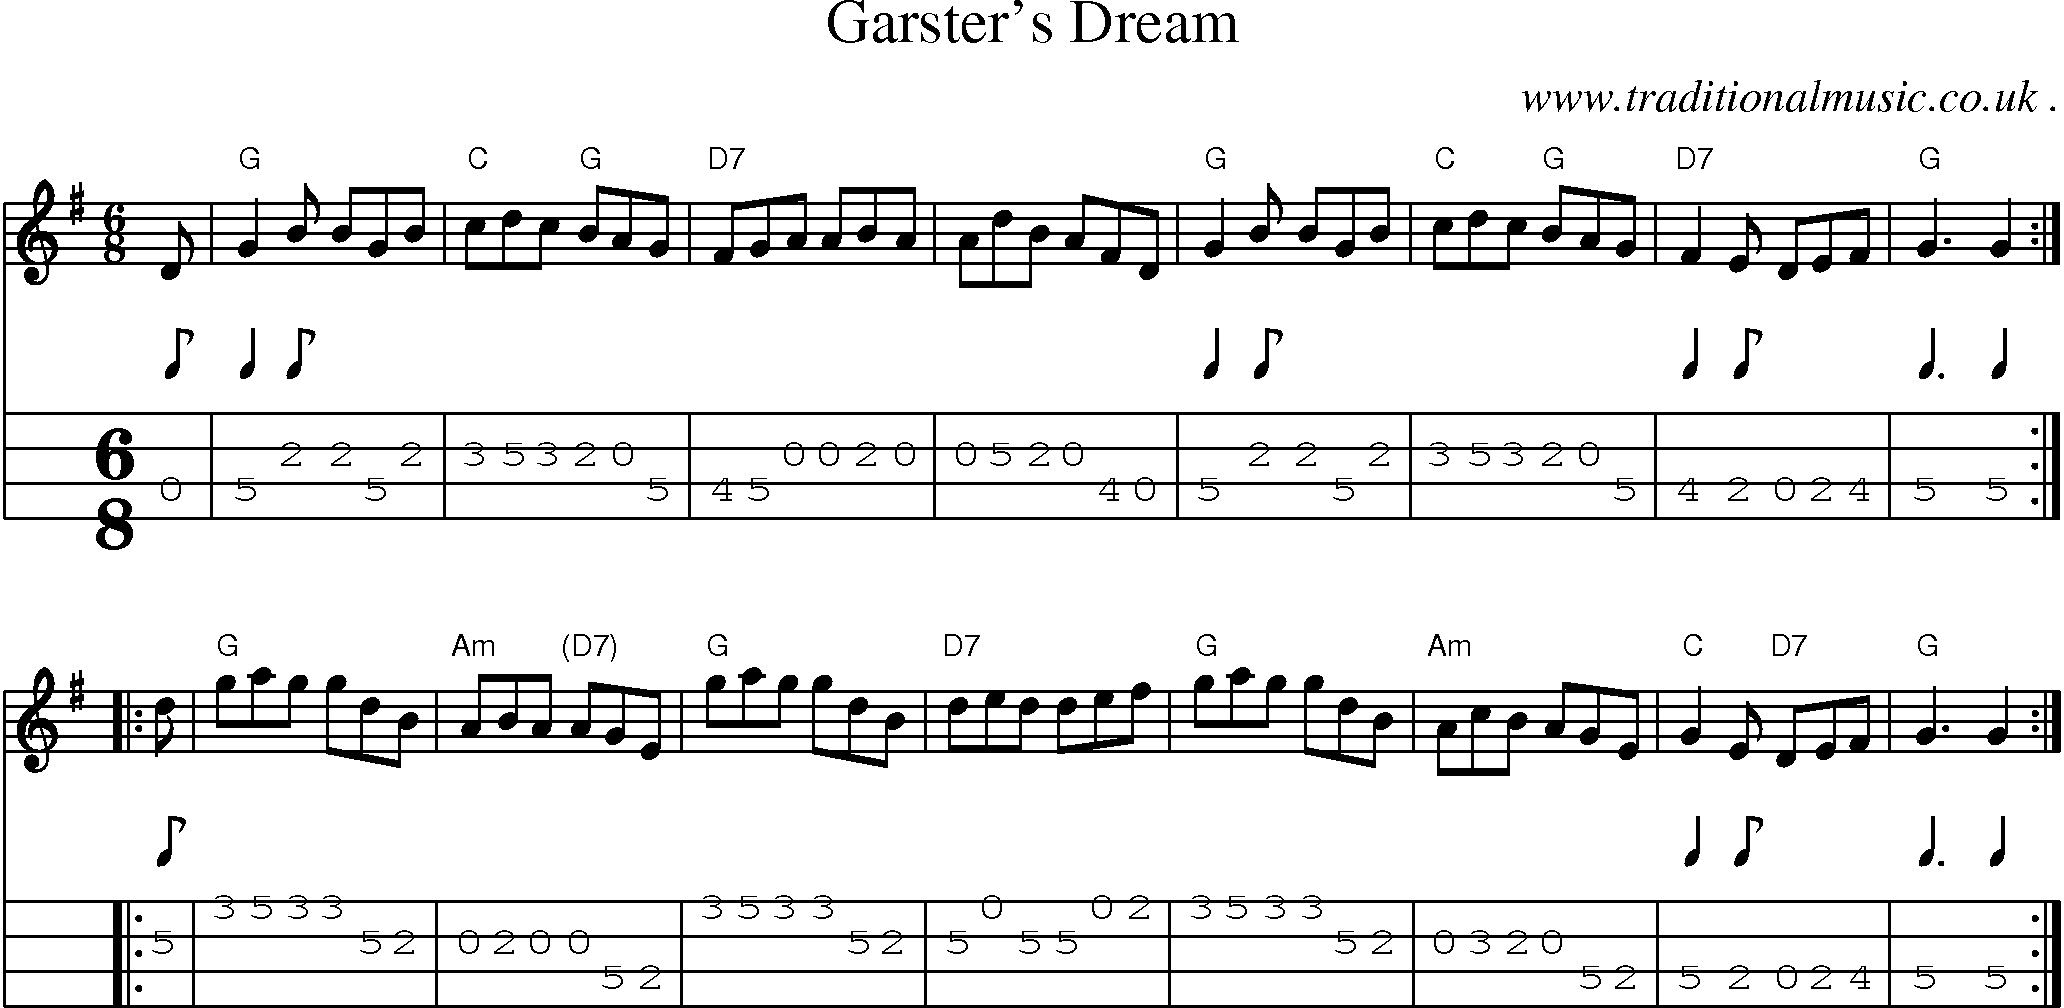 Sheet-music  score, Chords and Mandolin Tabs for Garsters Dream